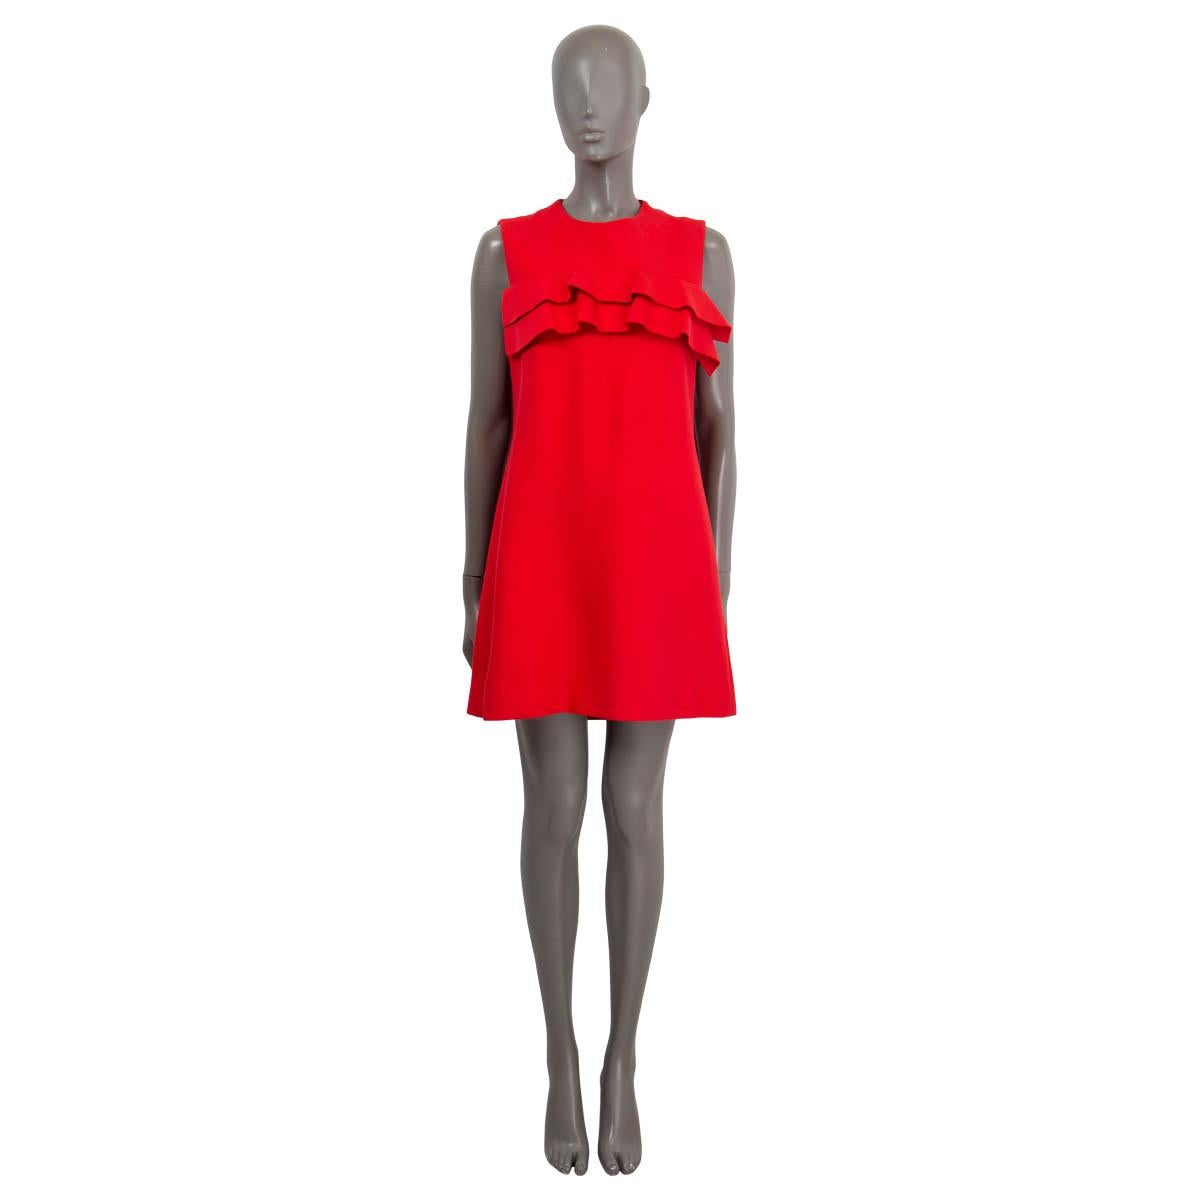 100% authentic Louis Vuitton sleeveless a-line mini dress in red (viscose 76%) and silk (24%) with ruffle detail around the chest. Opens with a black zipper on the back and is lined in silk (100%). Has been worn and is in excellent condition.